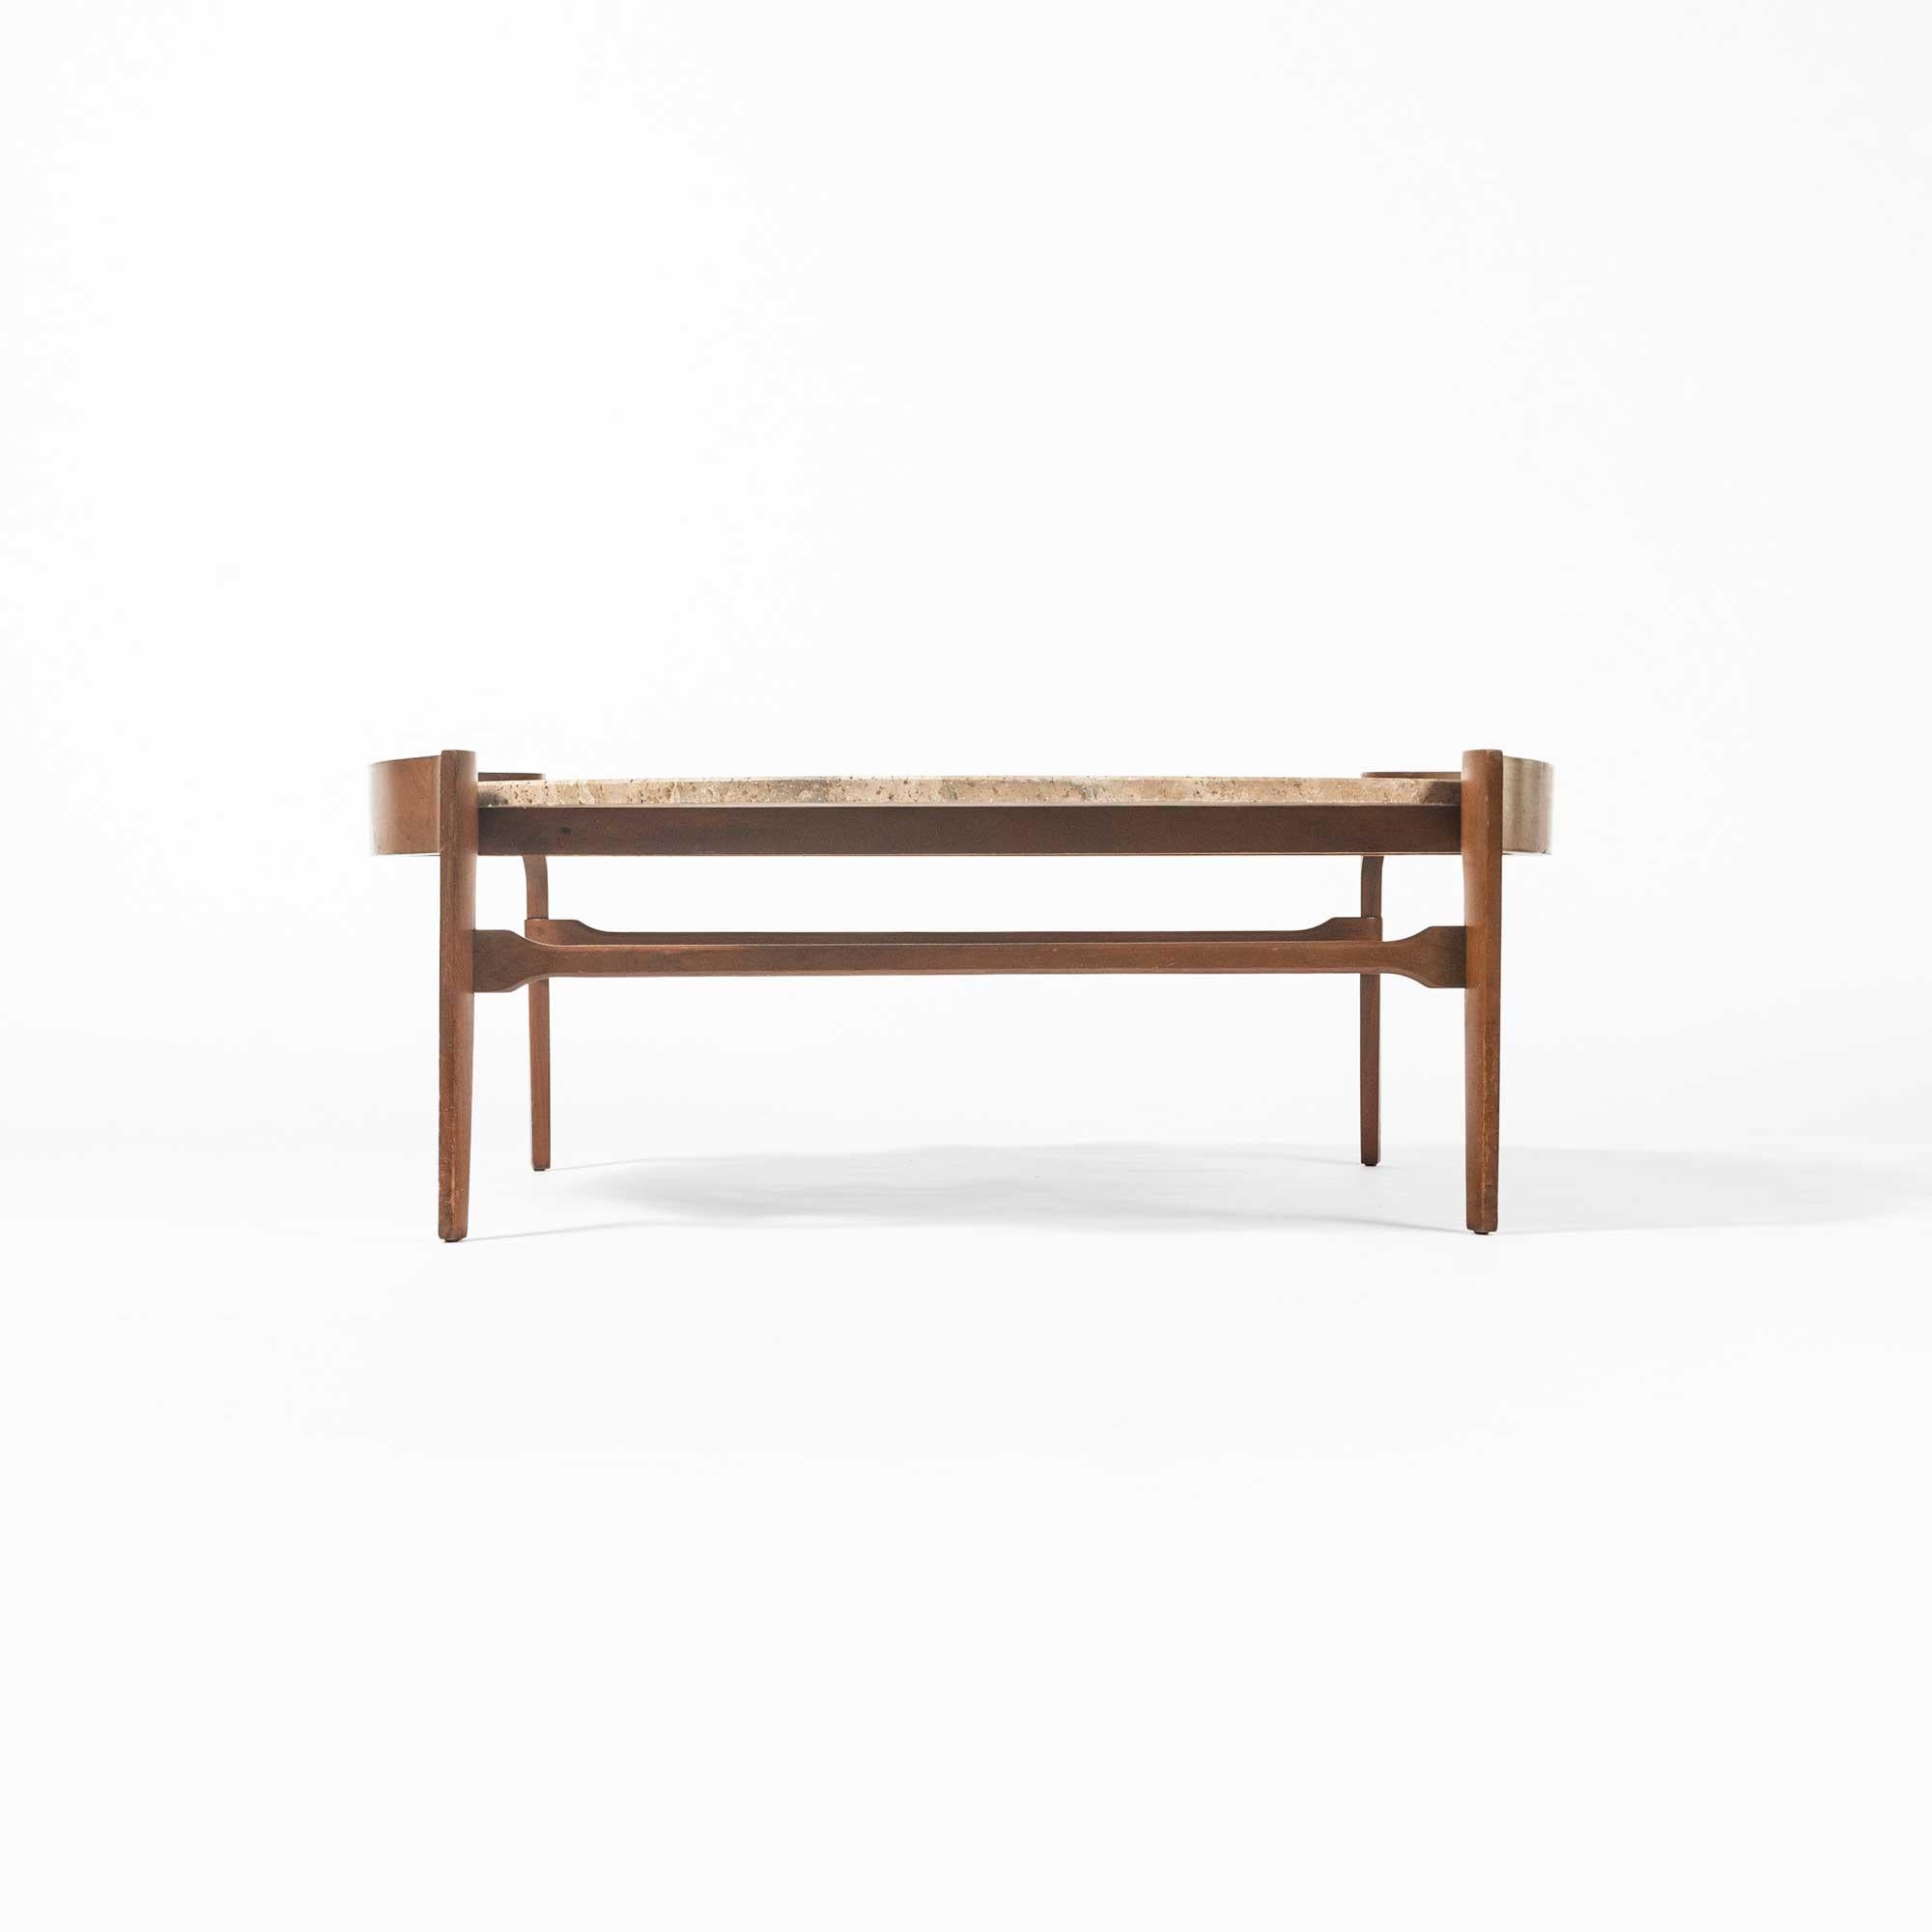 Bertha Schaefer is an award-winning American modernist furniture and interior designer. Her work has heavy Bauhaus inspired elements and produced furniture for M. Singer & Sons from 1950 through 1961. Coffee table by Bertha Schaefer for M. Singer &